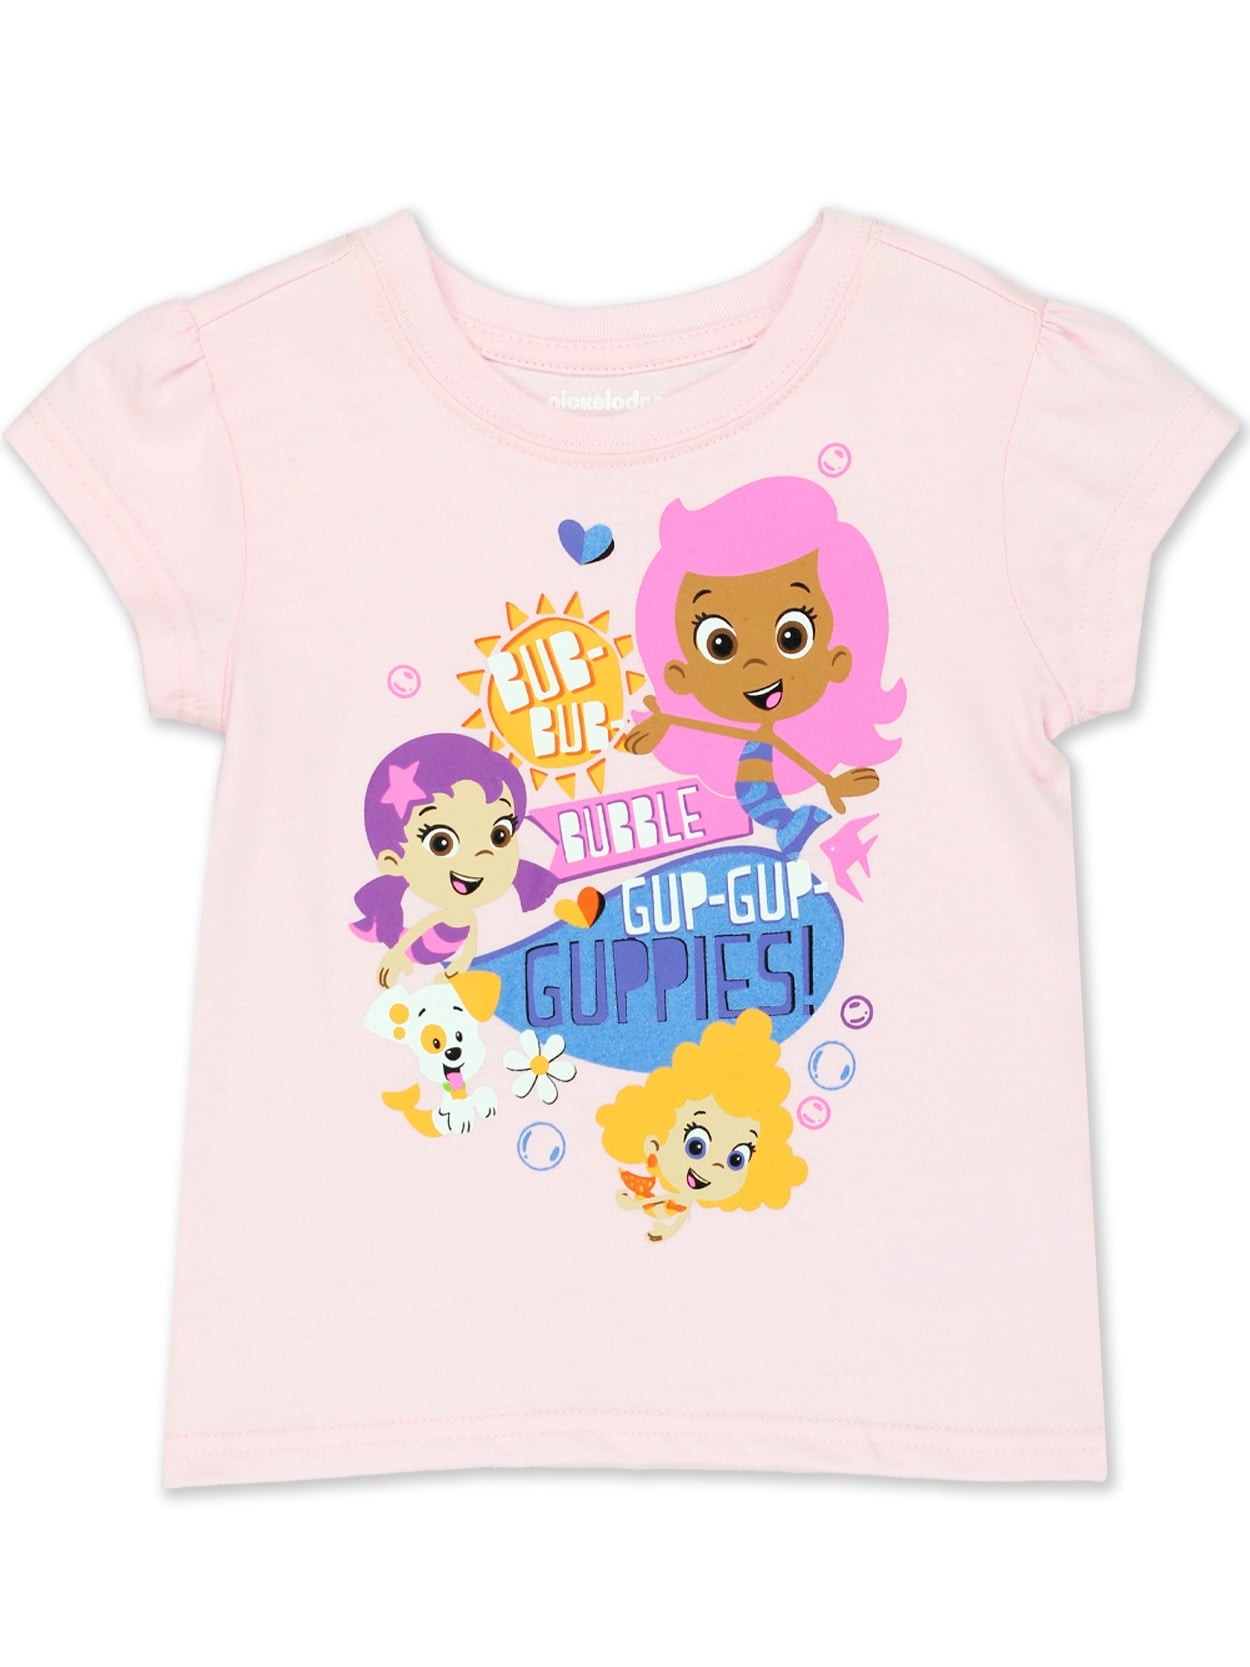 Bubble Guppies Toddler Girl Shirt & Shorts Outfit Set New 24 Months Molly 